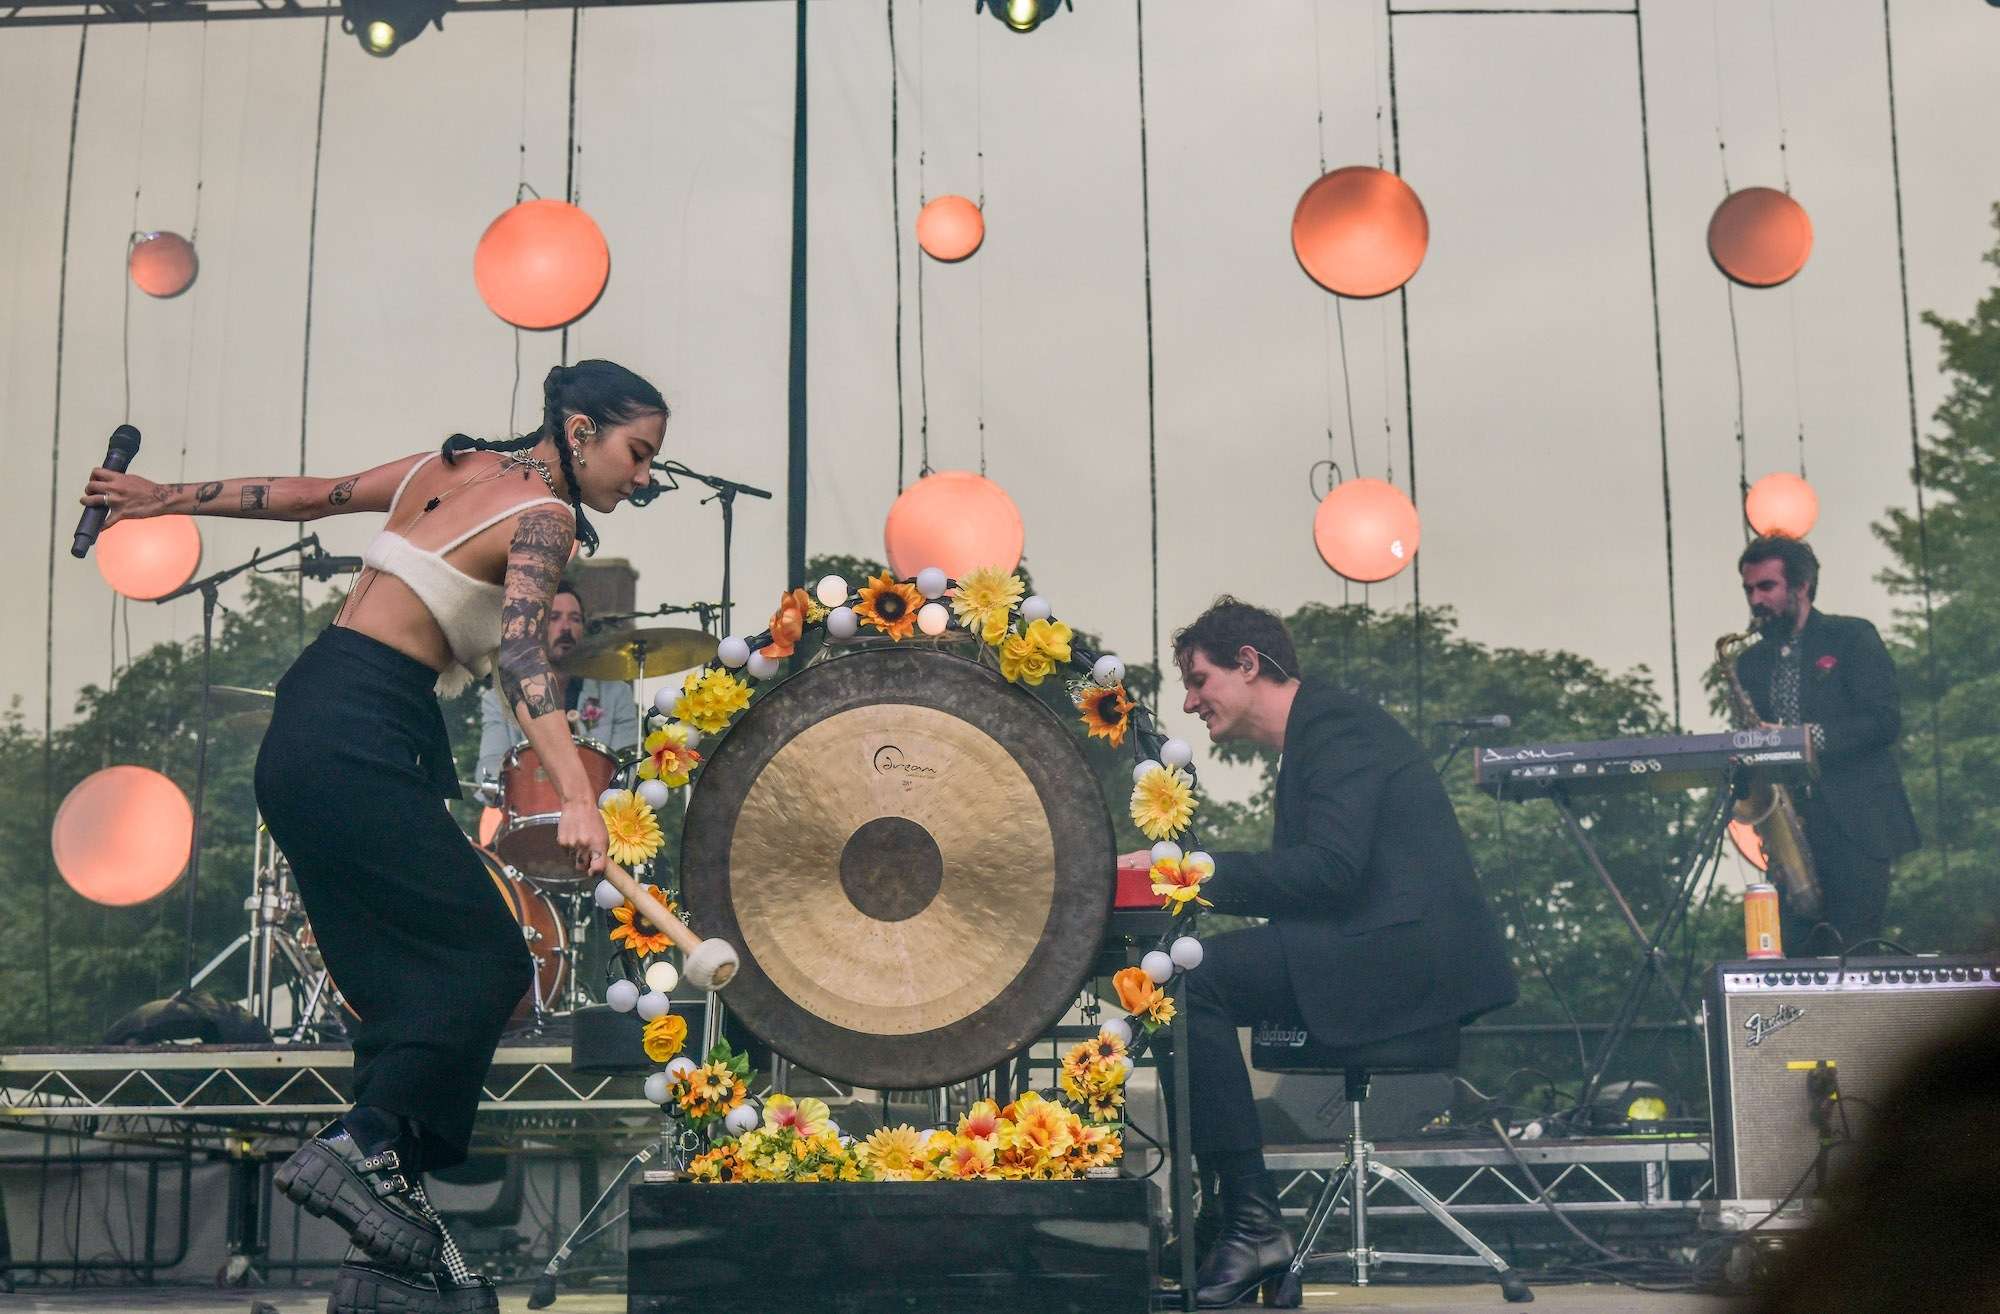 Japanese Breakfast Live At Pitchfork [GALLERY] 6